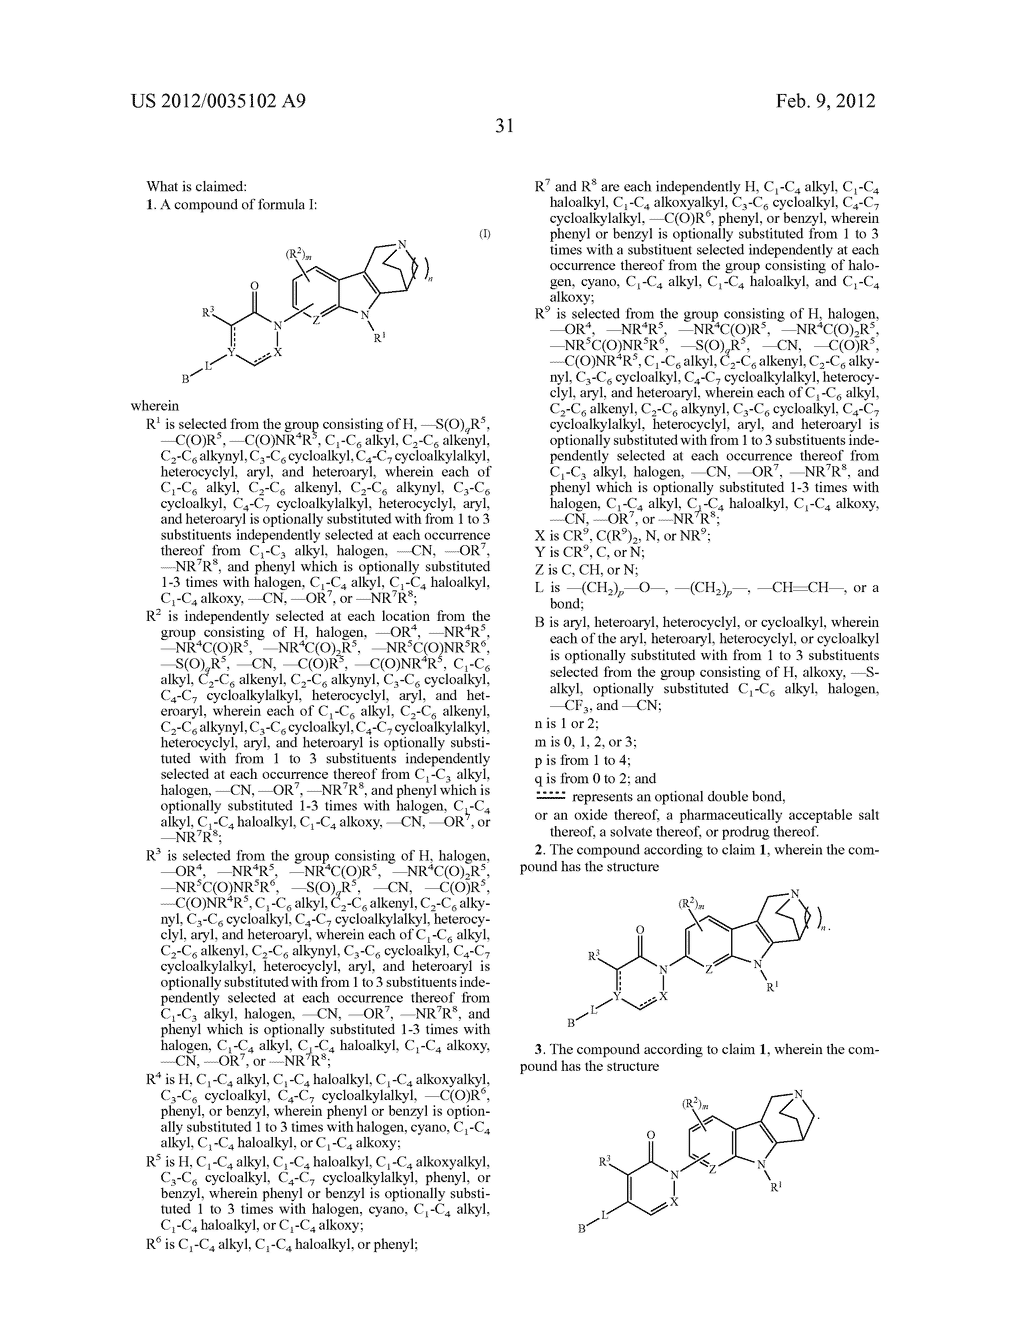 AZINONE-SUBSTITUTED AZABICYCLOALKANE-INDOLE AND     AZABICYCLOALKANE-PYRROLO-PYRIDINE MCH-1 ANTAGONISTS, METHODS OF MAKING,     AND USE THEREOF - diagram, schematic, and image 32